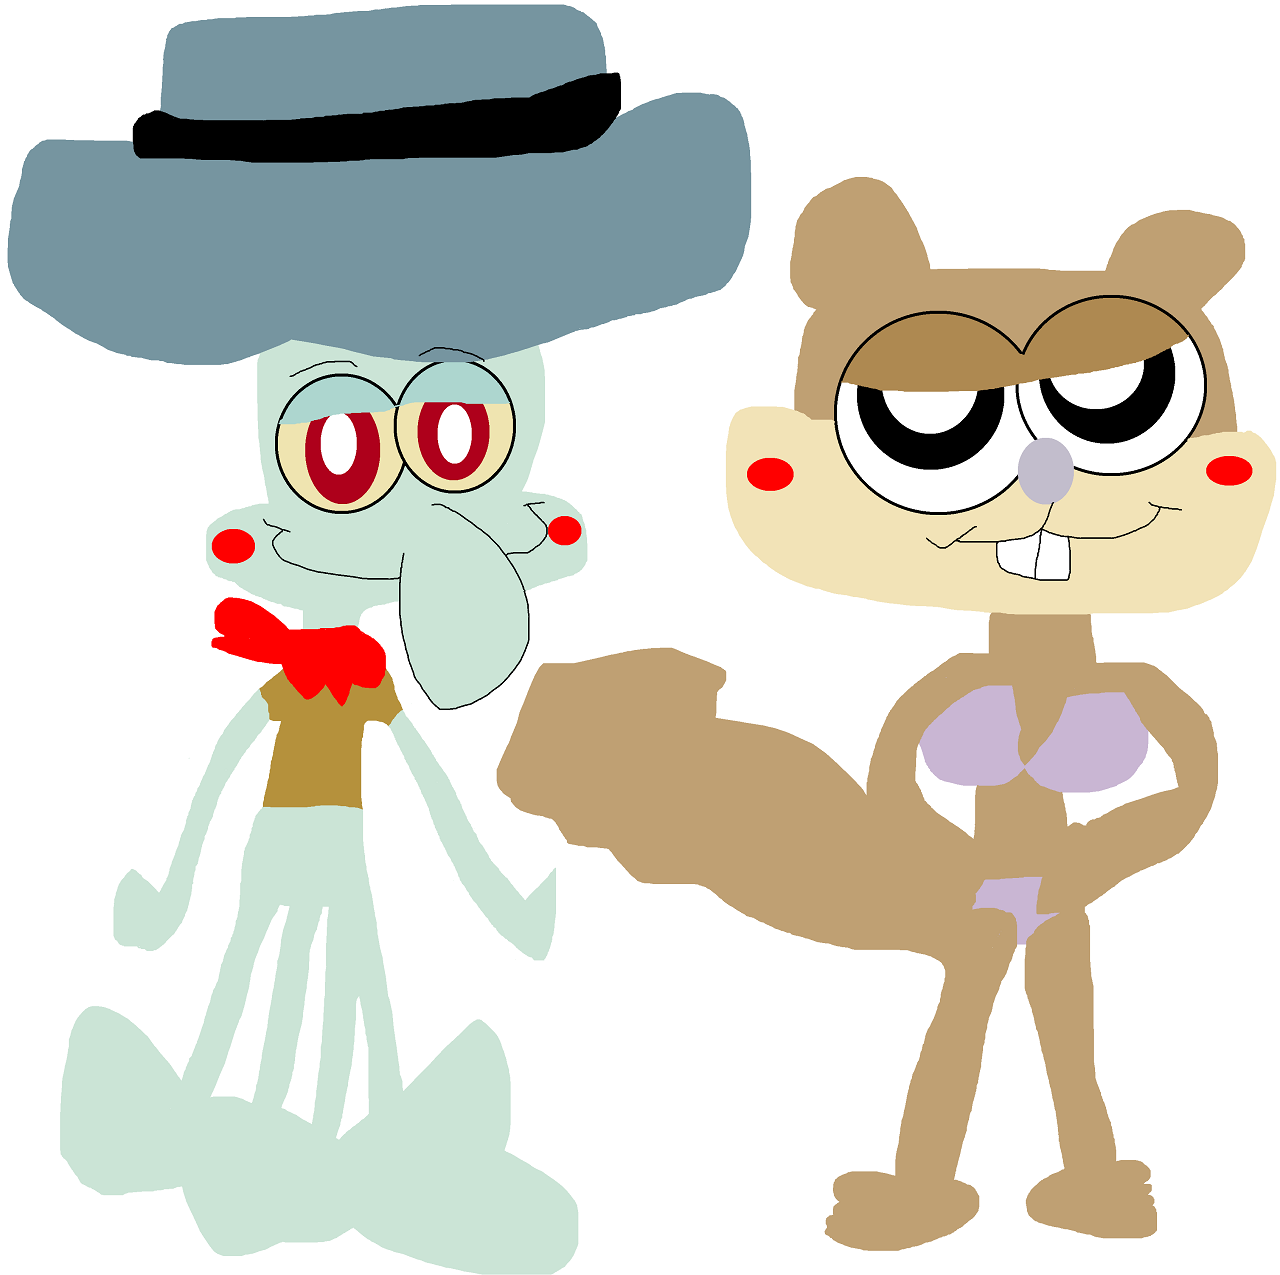 Cowboy Hat Squidie And Sandy by Falconlobo